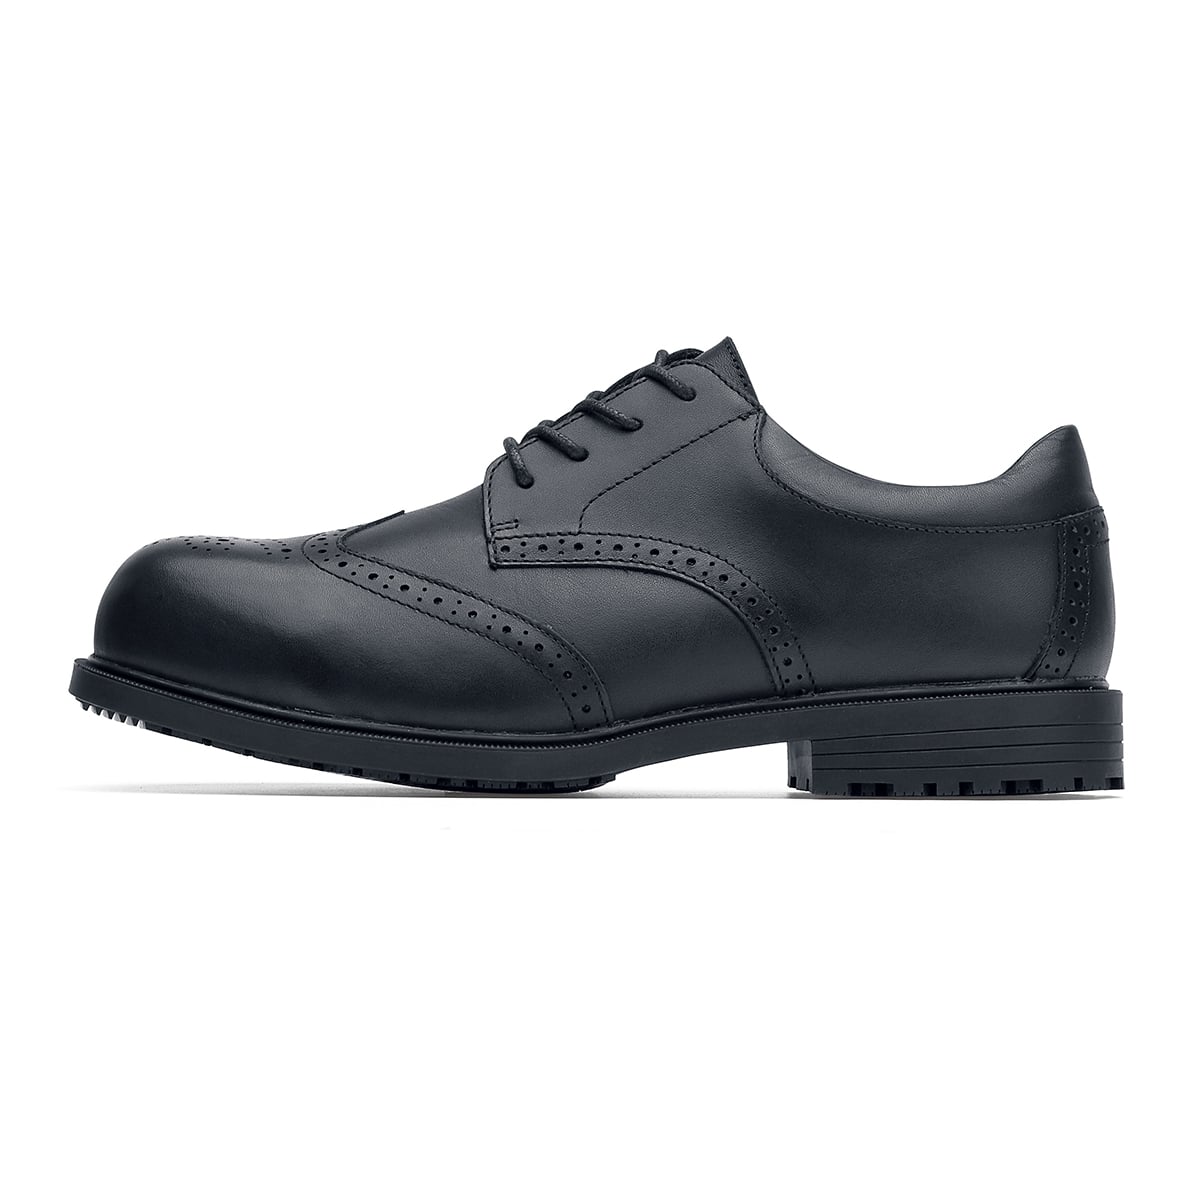 The Executive Wing Tip II ST from Shoes For Crews are formal slip-resistant safety shoes, made of leather and with a steel toe, seen from the left.